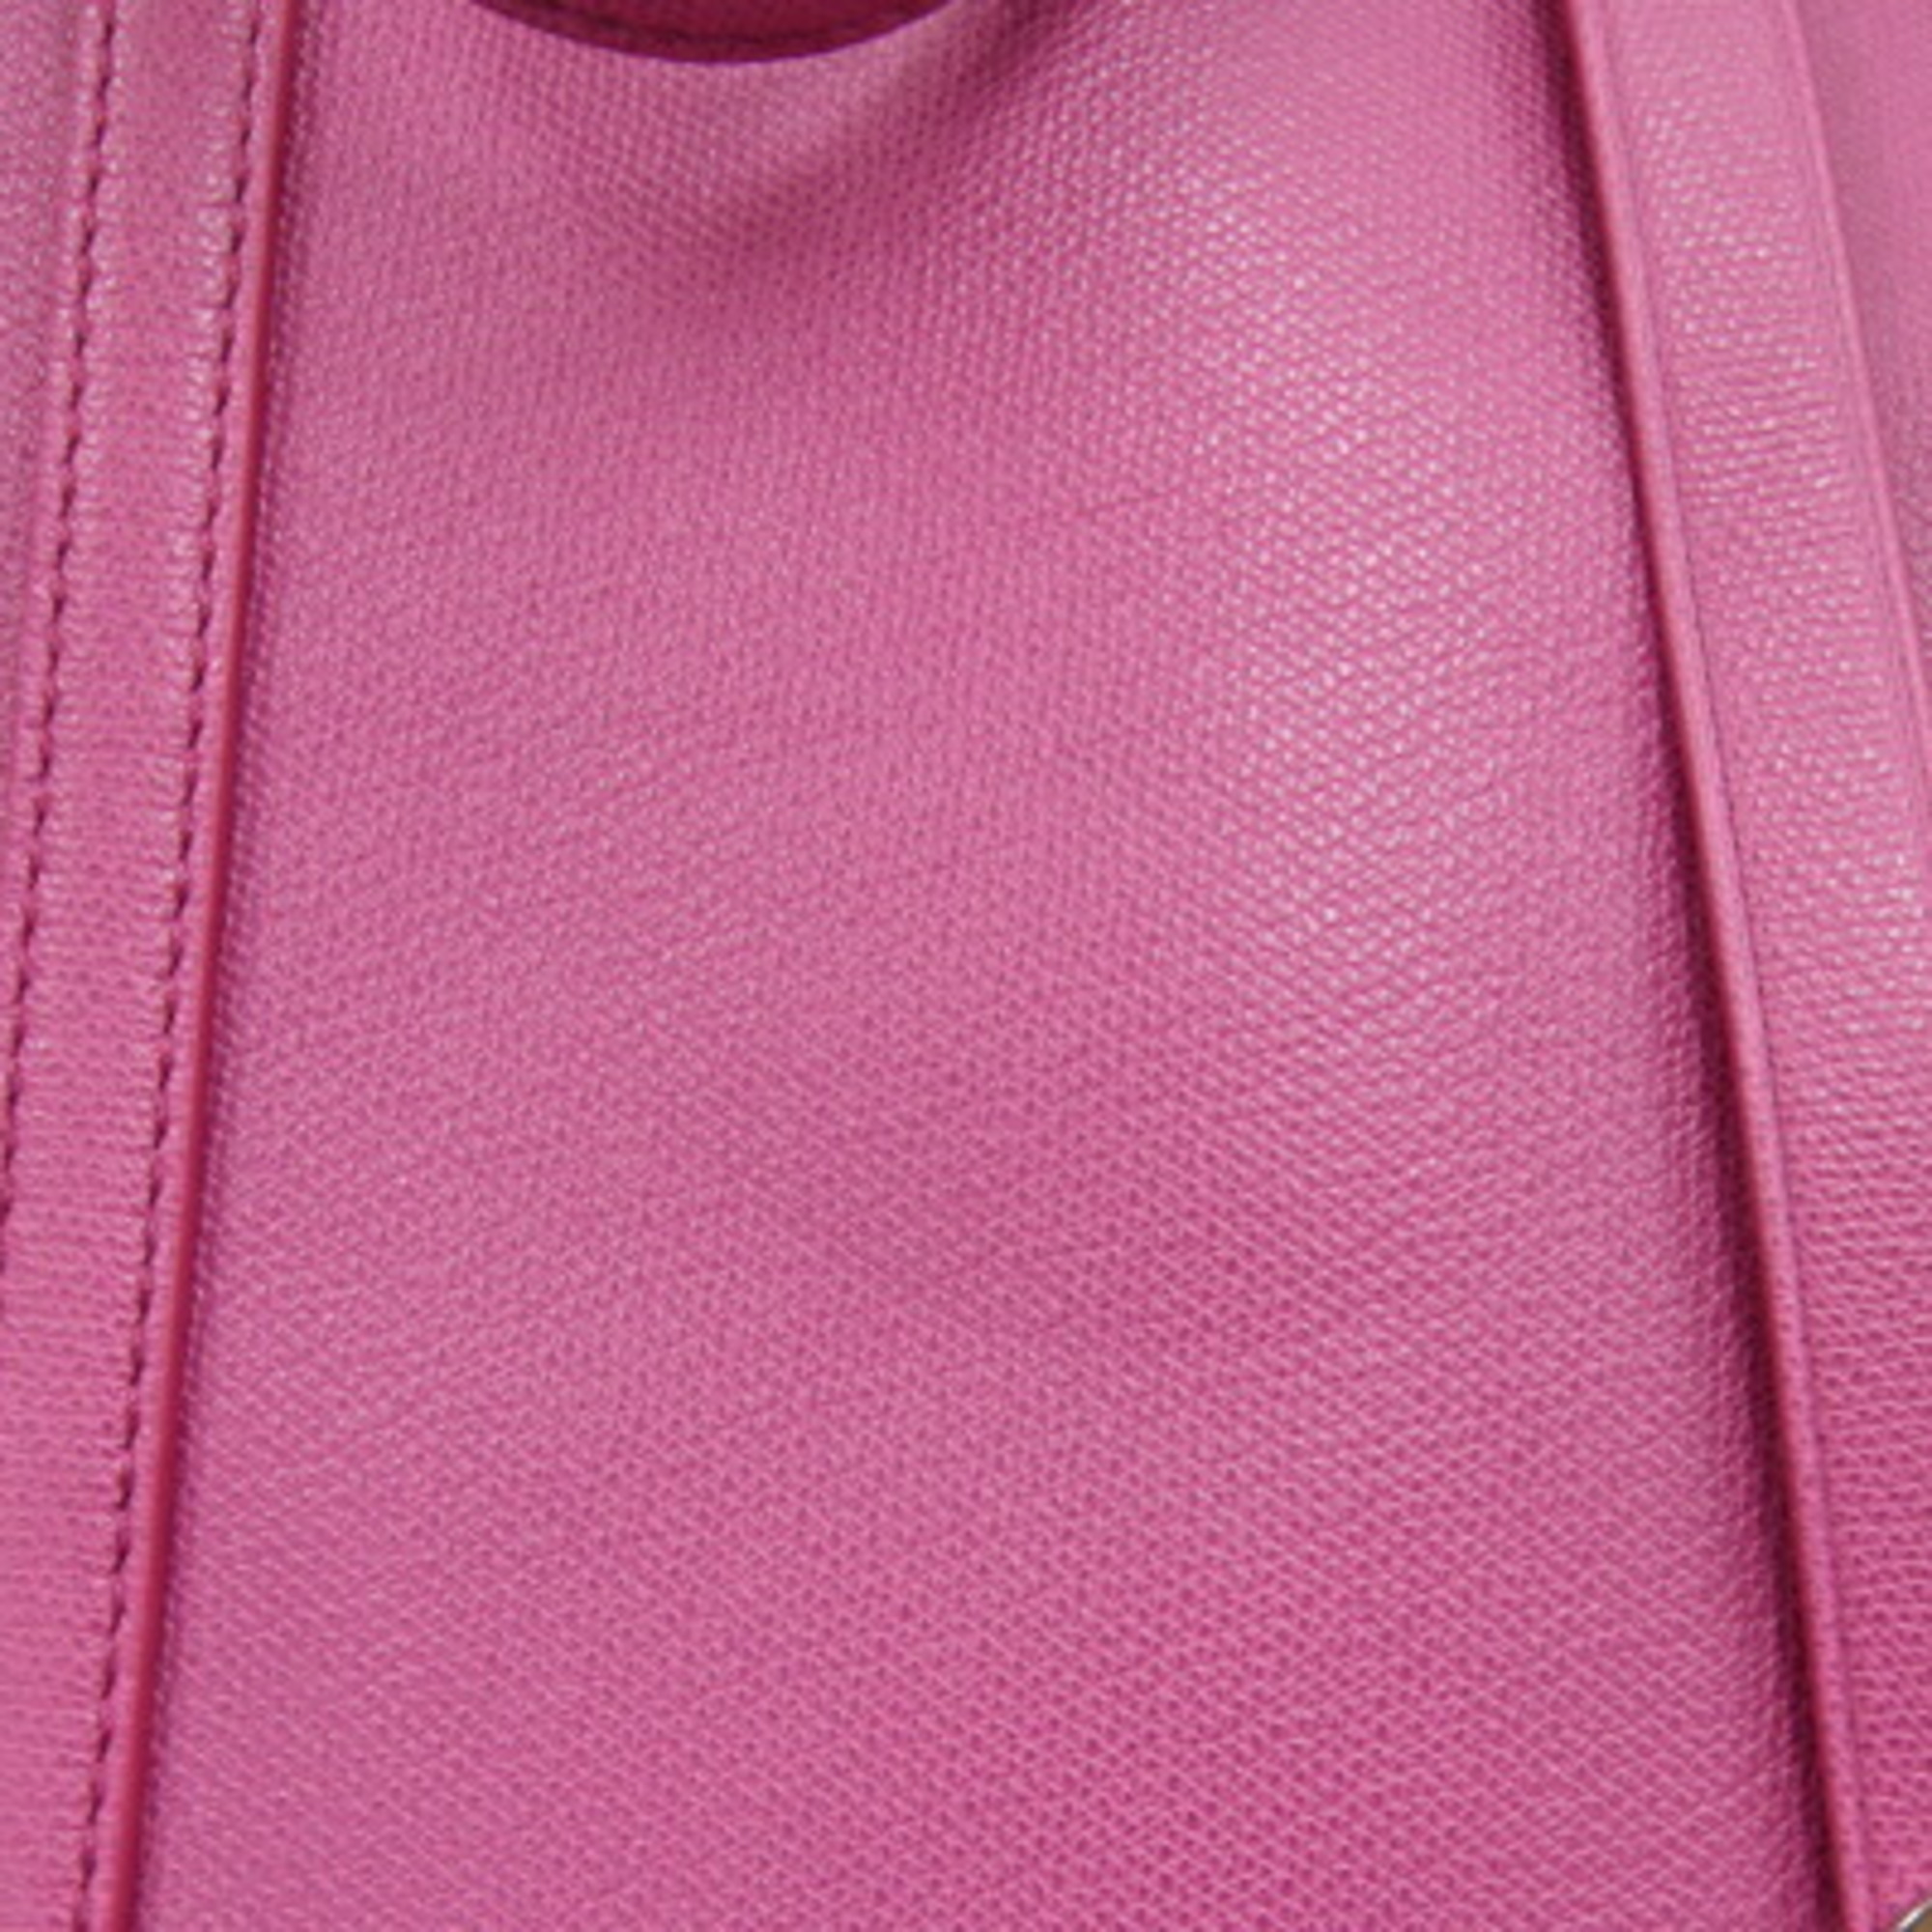 Tiffany Tote Bag Pink Leather Shoulder Shocking Women's TIFFANY&CO